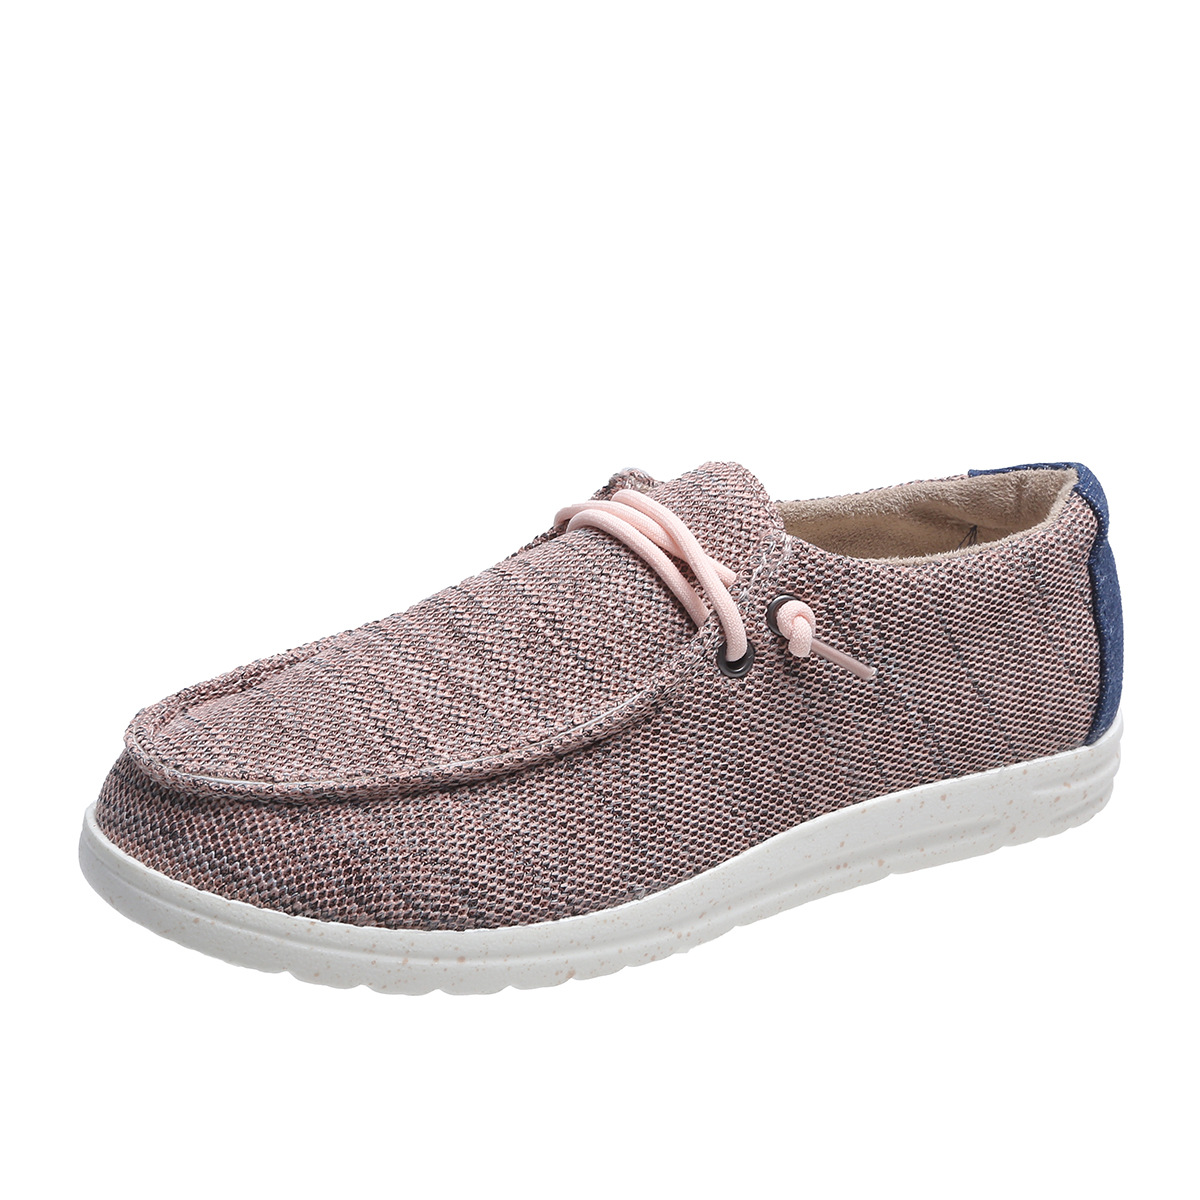 Nicole Hoyt Women's Wendy Chambray, White Pink The Wendy shoe will be an instant favorite in your modern-casual collection. Cotton canvas upper. Bungee lace-up construction. Rounded toe. Signature logo details throughout. Soft, oxford cloth lining. Memory foam cushioned, removable insole. Ultra-light, lugged synthetic outsole. Imported. Product measurements were taken using size 8, width M. Please note that measurements may vary by size. Weight of footwear is based on a single item, not a pair. Measurements: Weight: 4 oz.